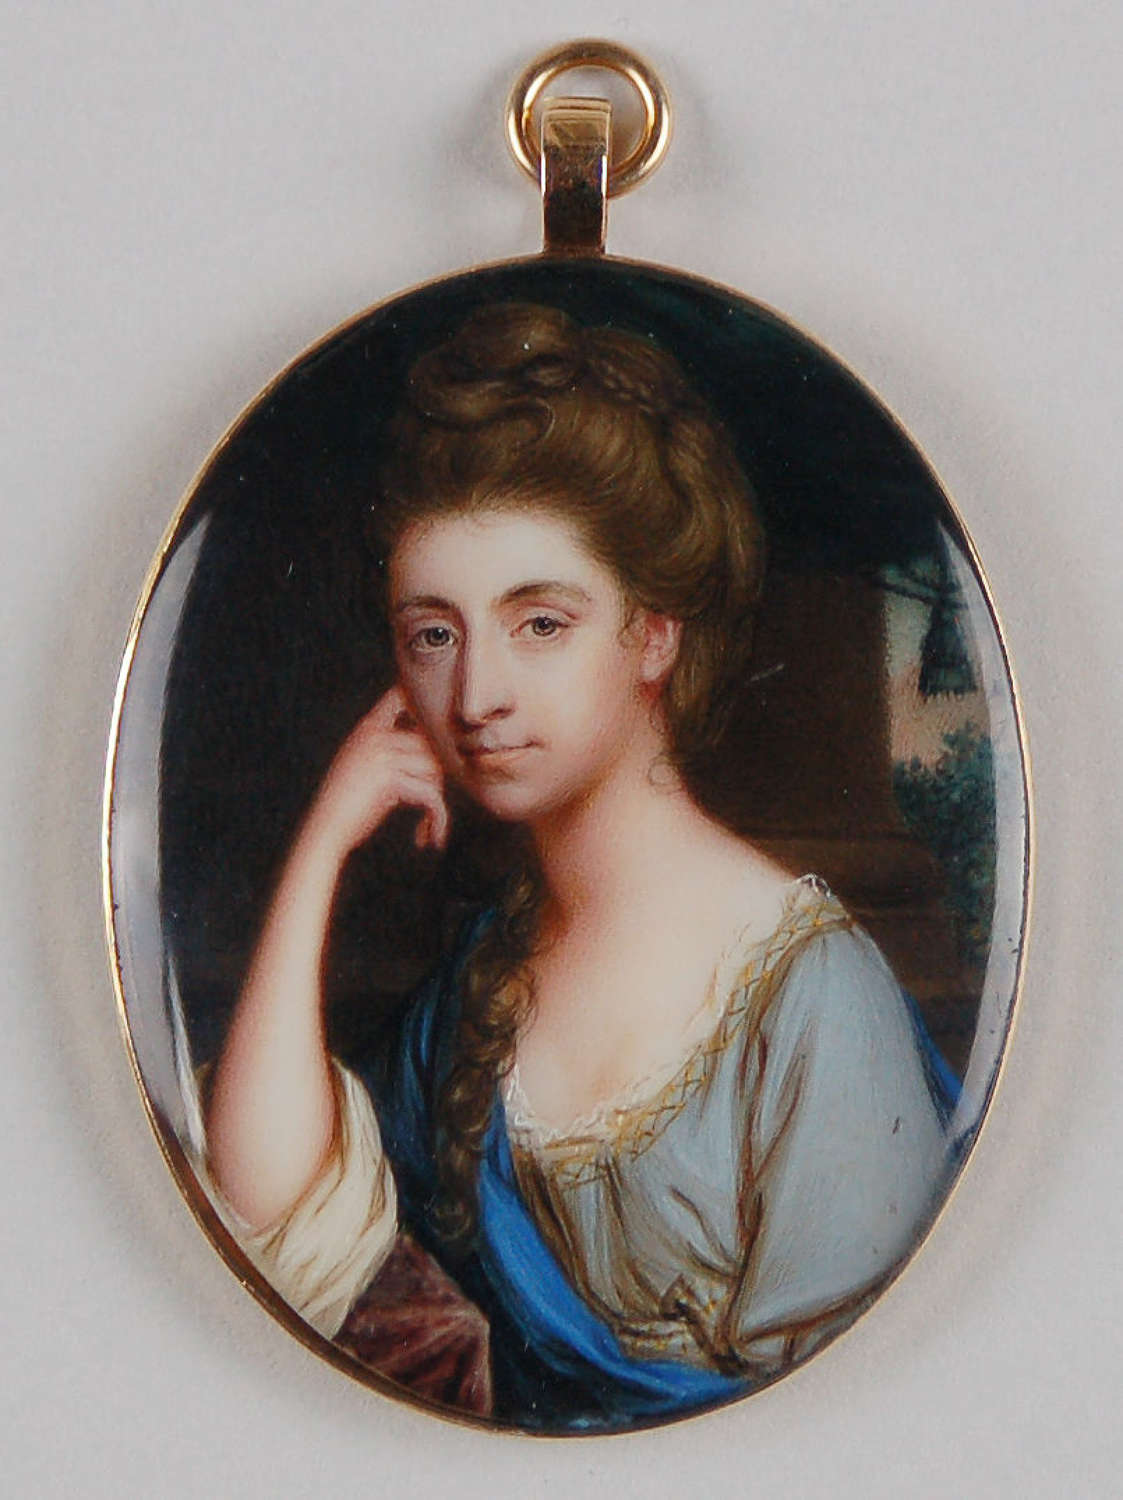 Miniature of a lady by J Scouler C1775